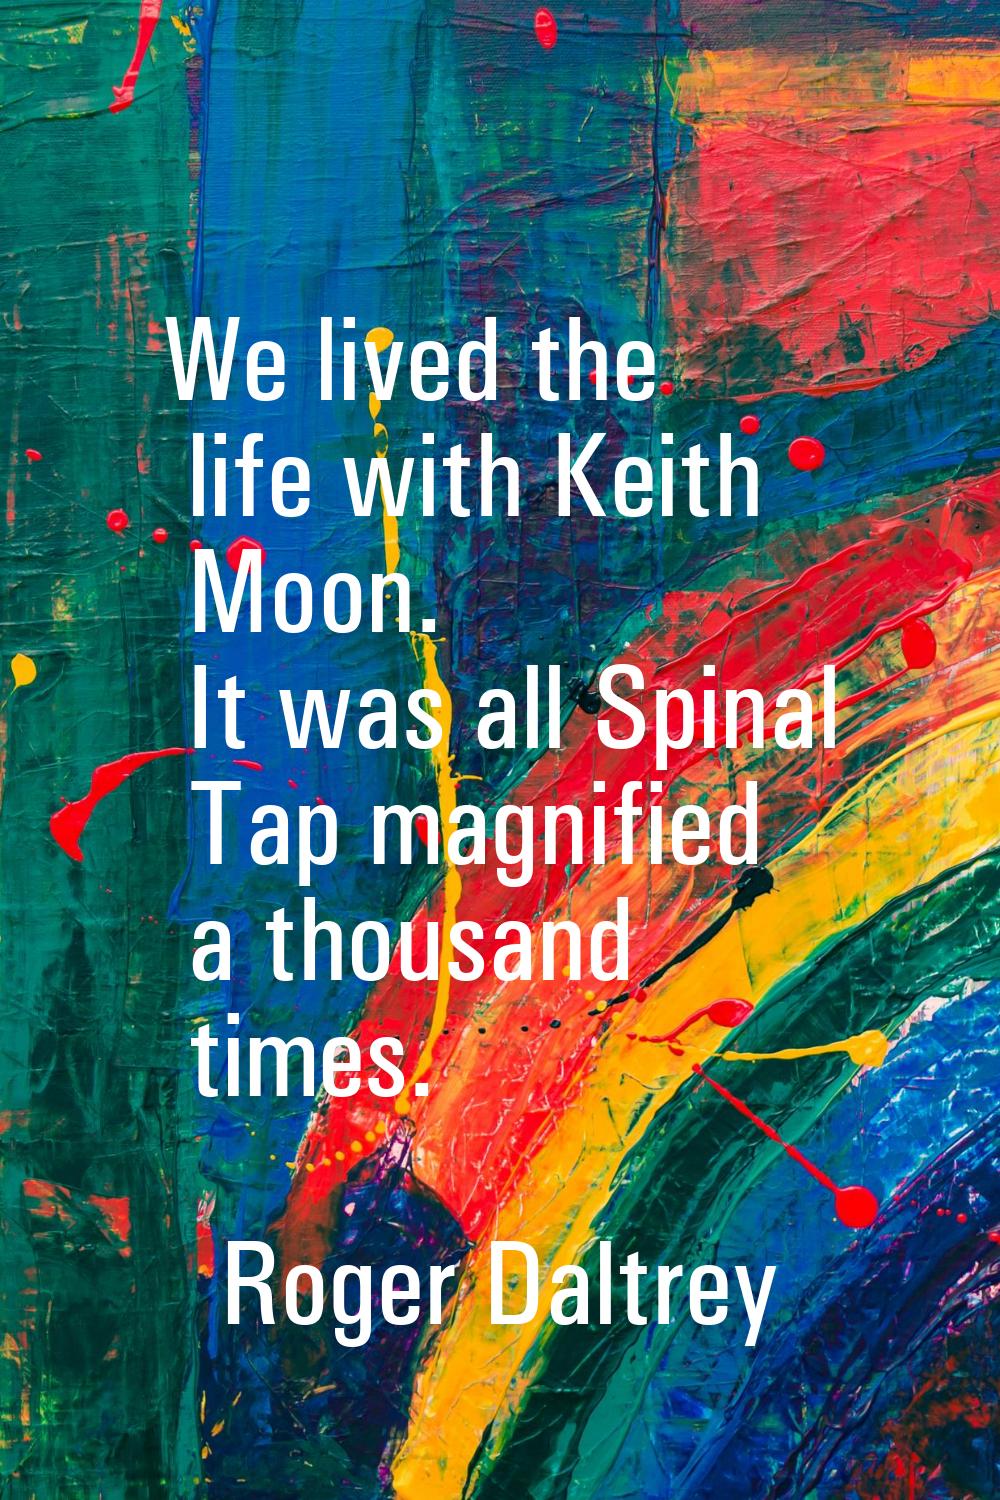 We lived the life with Keith Moon. It was all Spinal Tap magnified a thousand times.